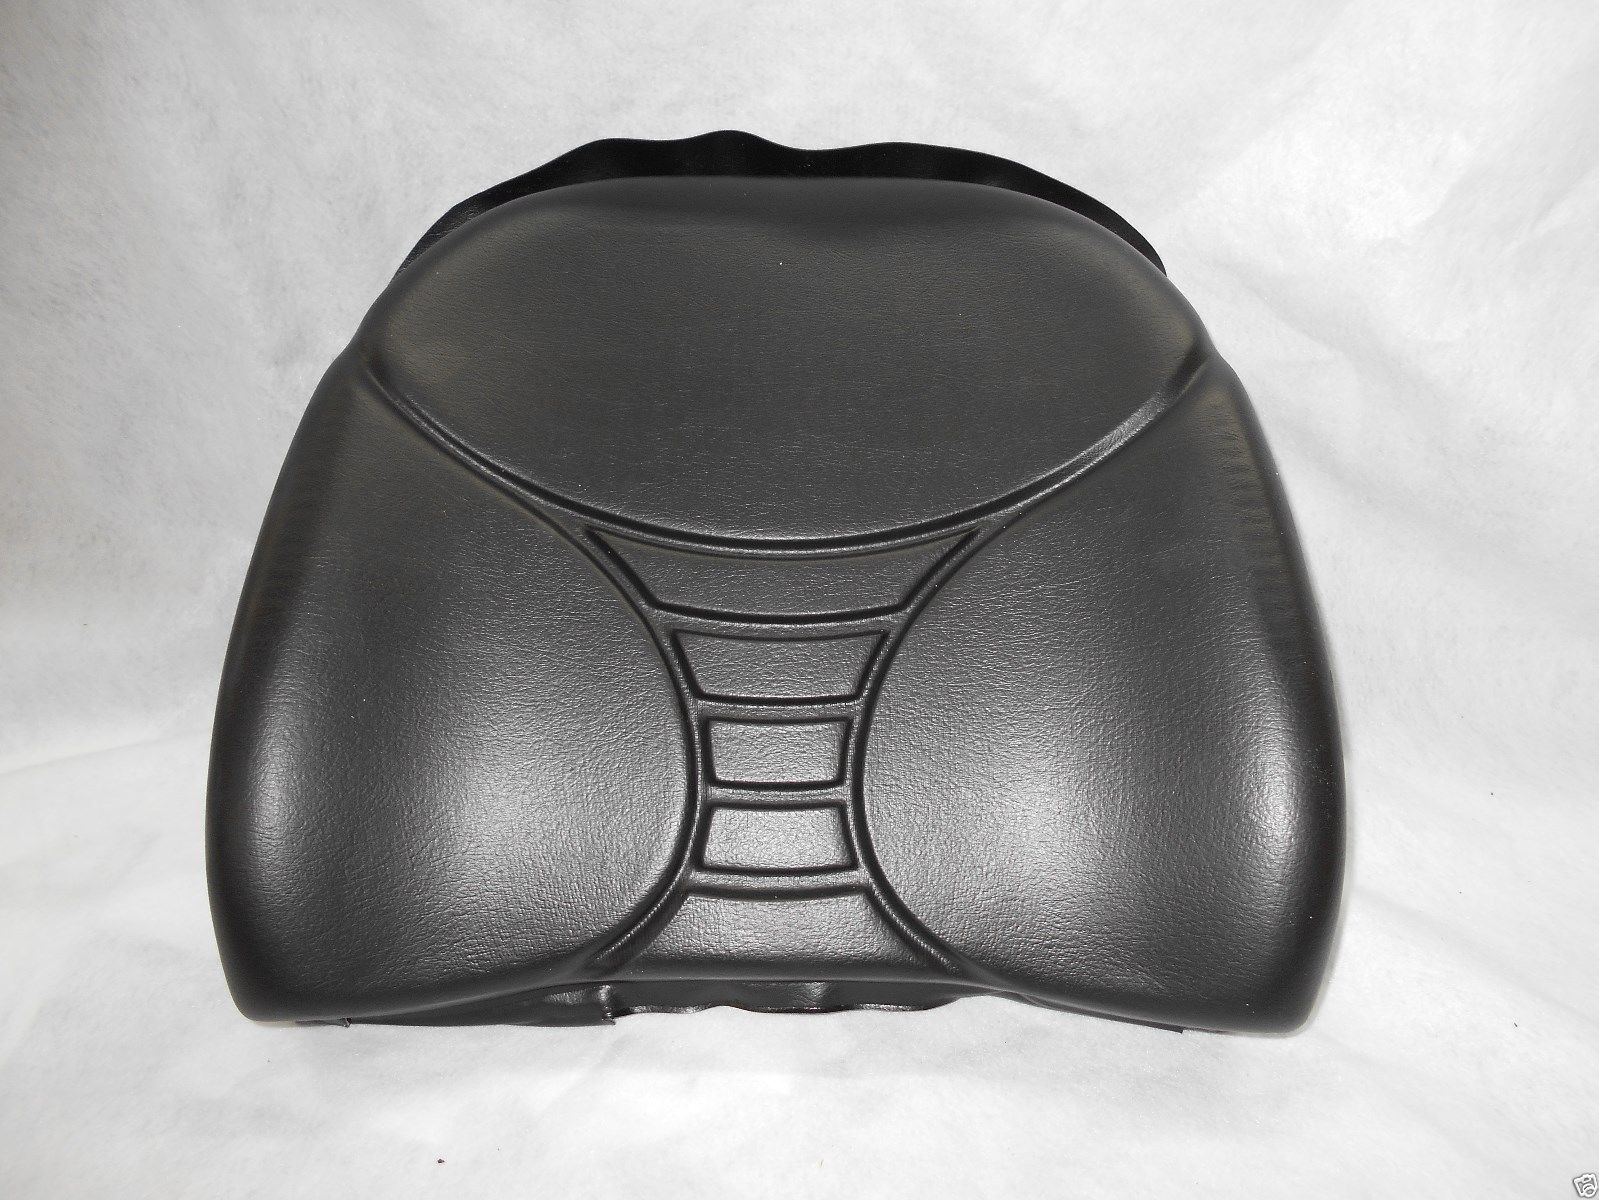 https://seat-warehouse.com/wp-content/uploads/imported/6/BLACK-BACK-REPLACEMENT-CUSHION-FOR-MILSCO-V5300-SUSPENSION-SEAT-LFd-172367402366.jpg